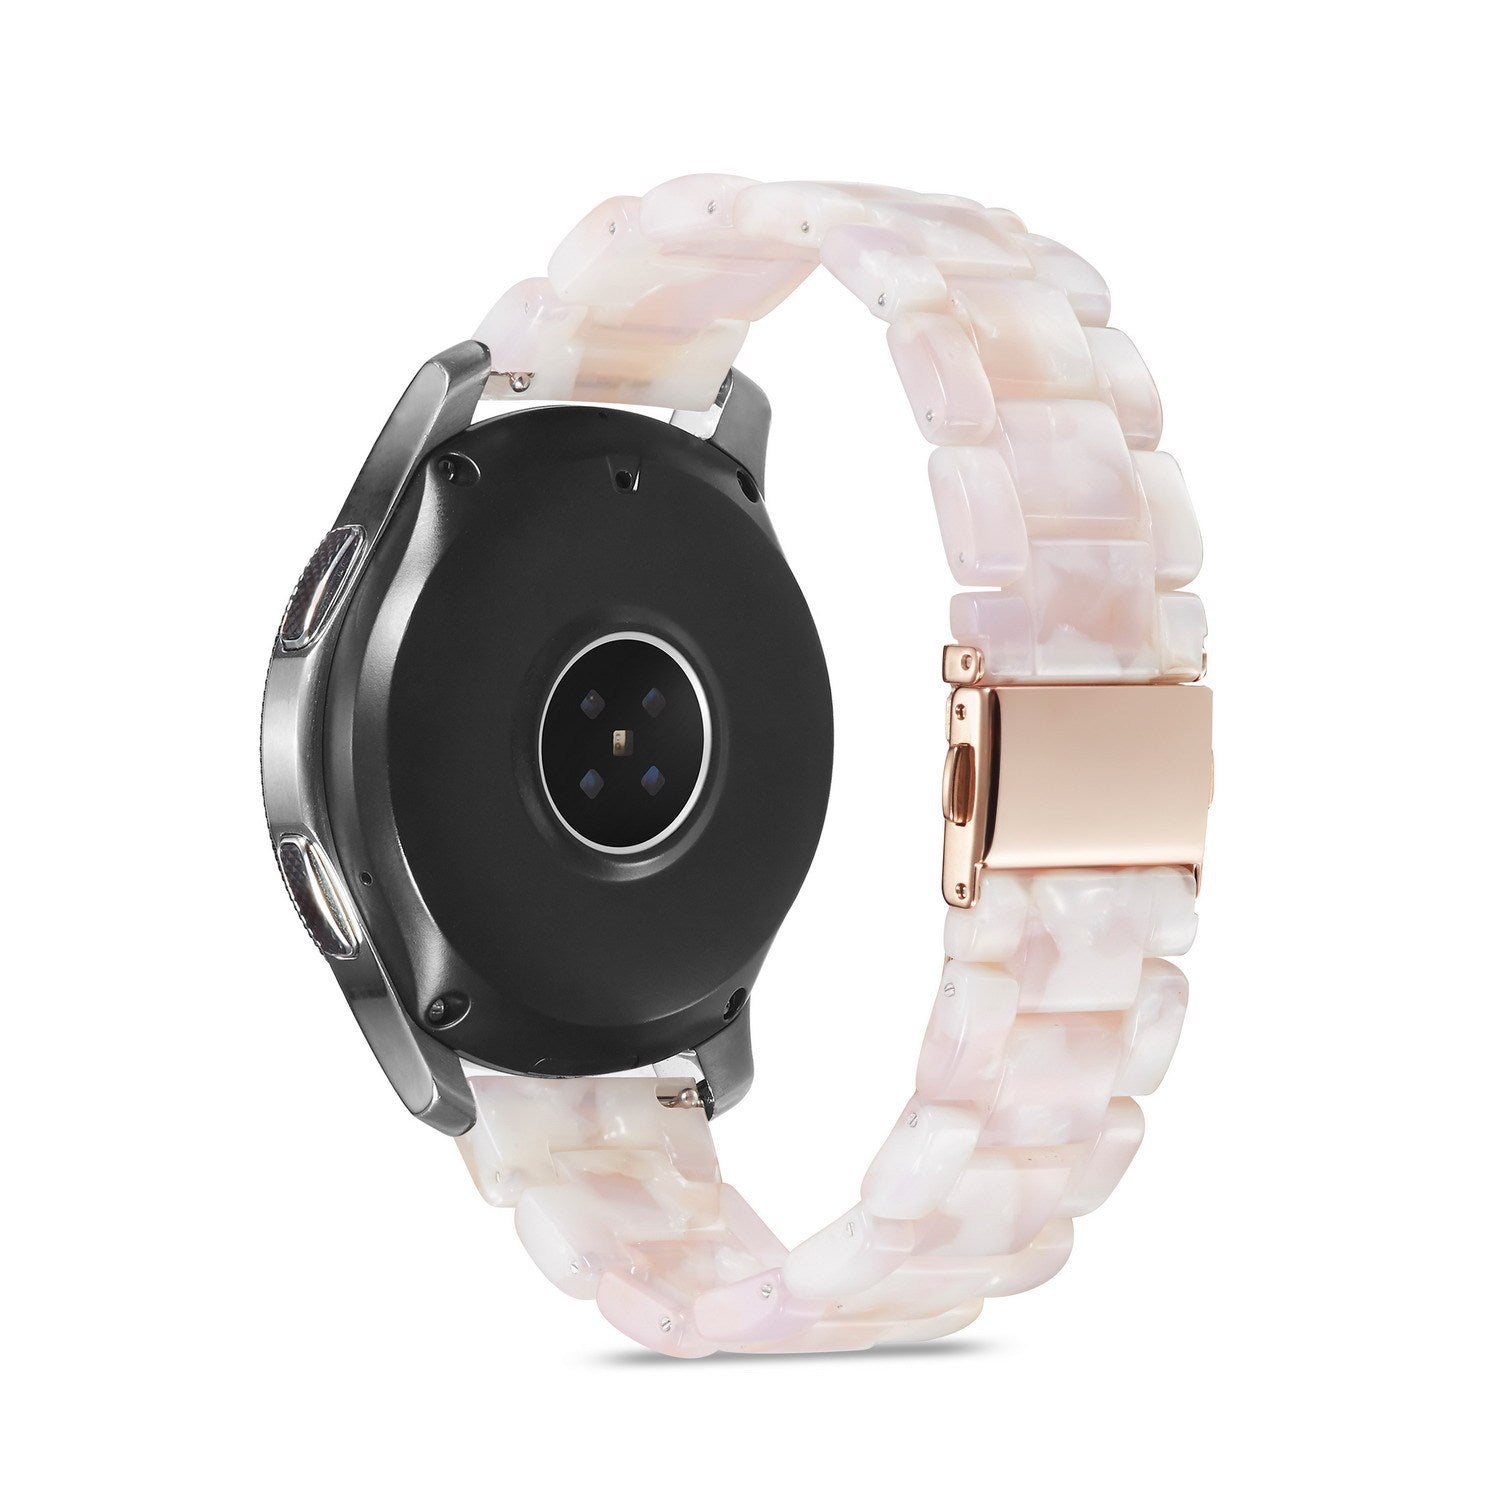 Rubber Strap For Smart Watches In Different Colors